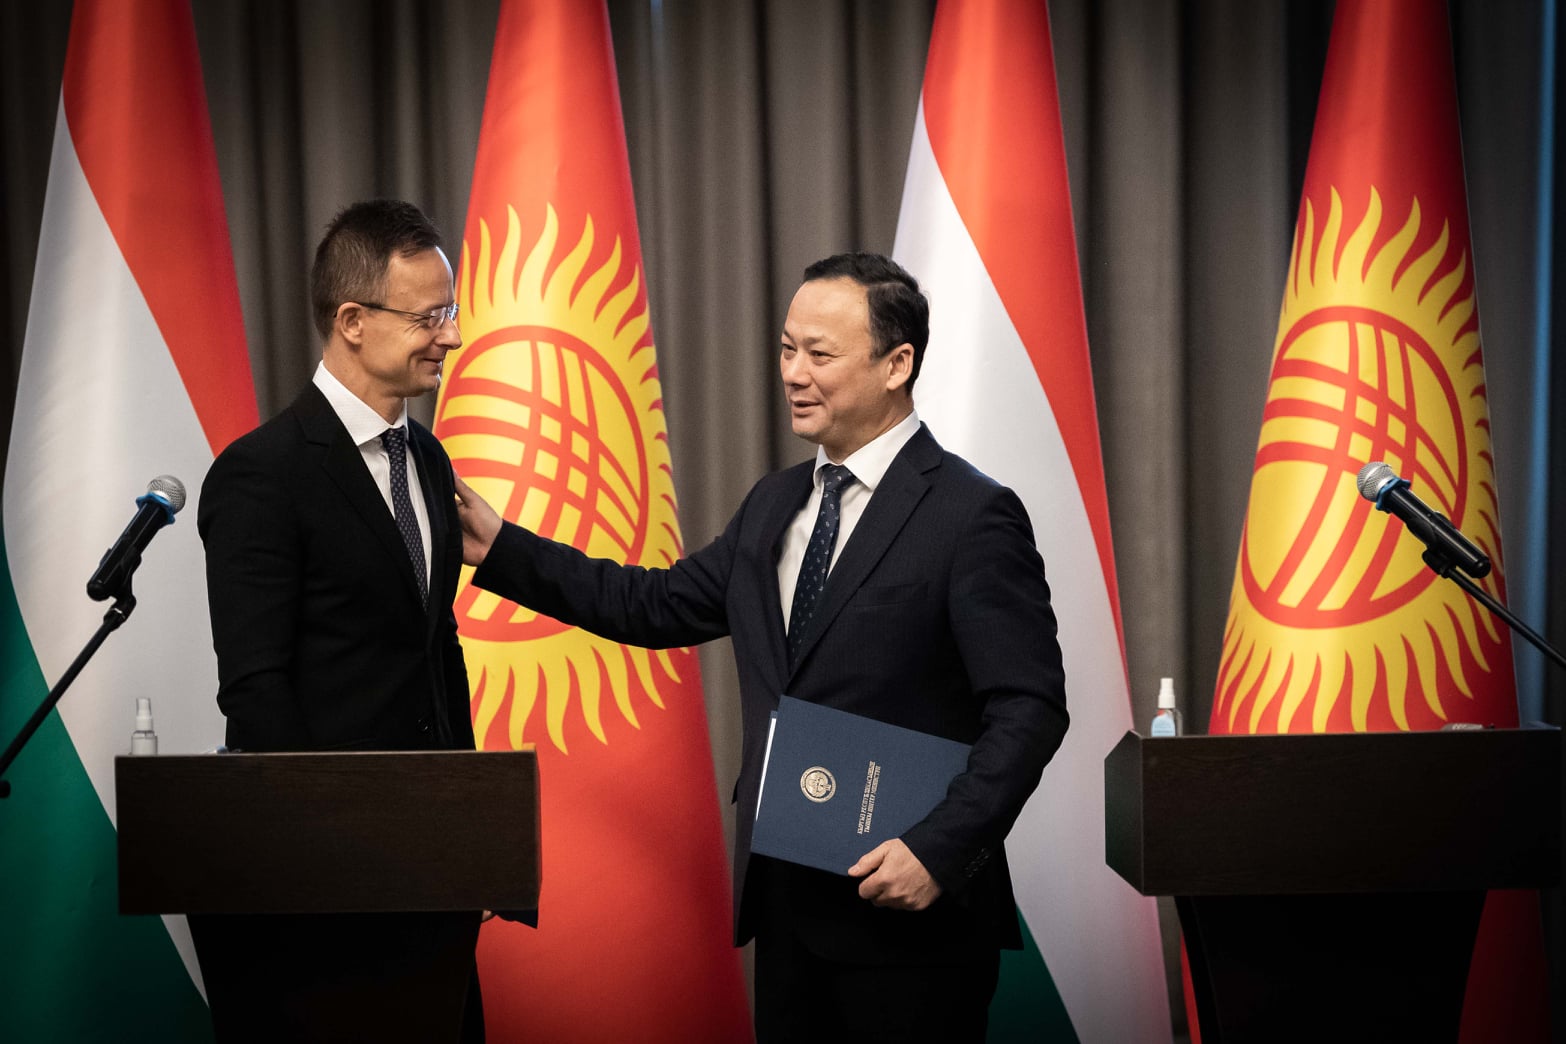 Hungary Launches 16 Million Dollar Development Fund with Kyrgyzstan